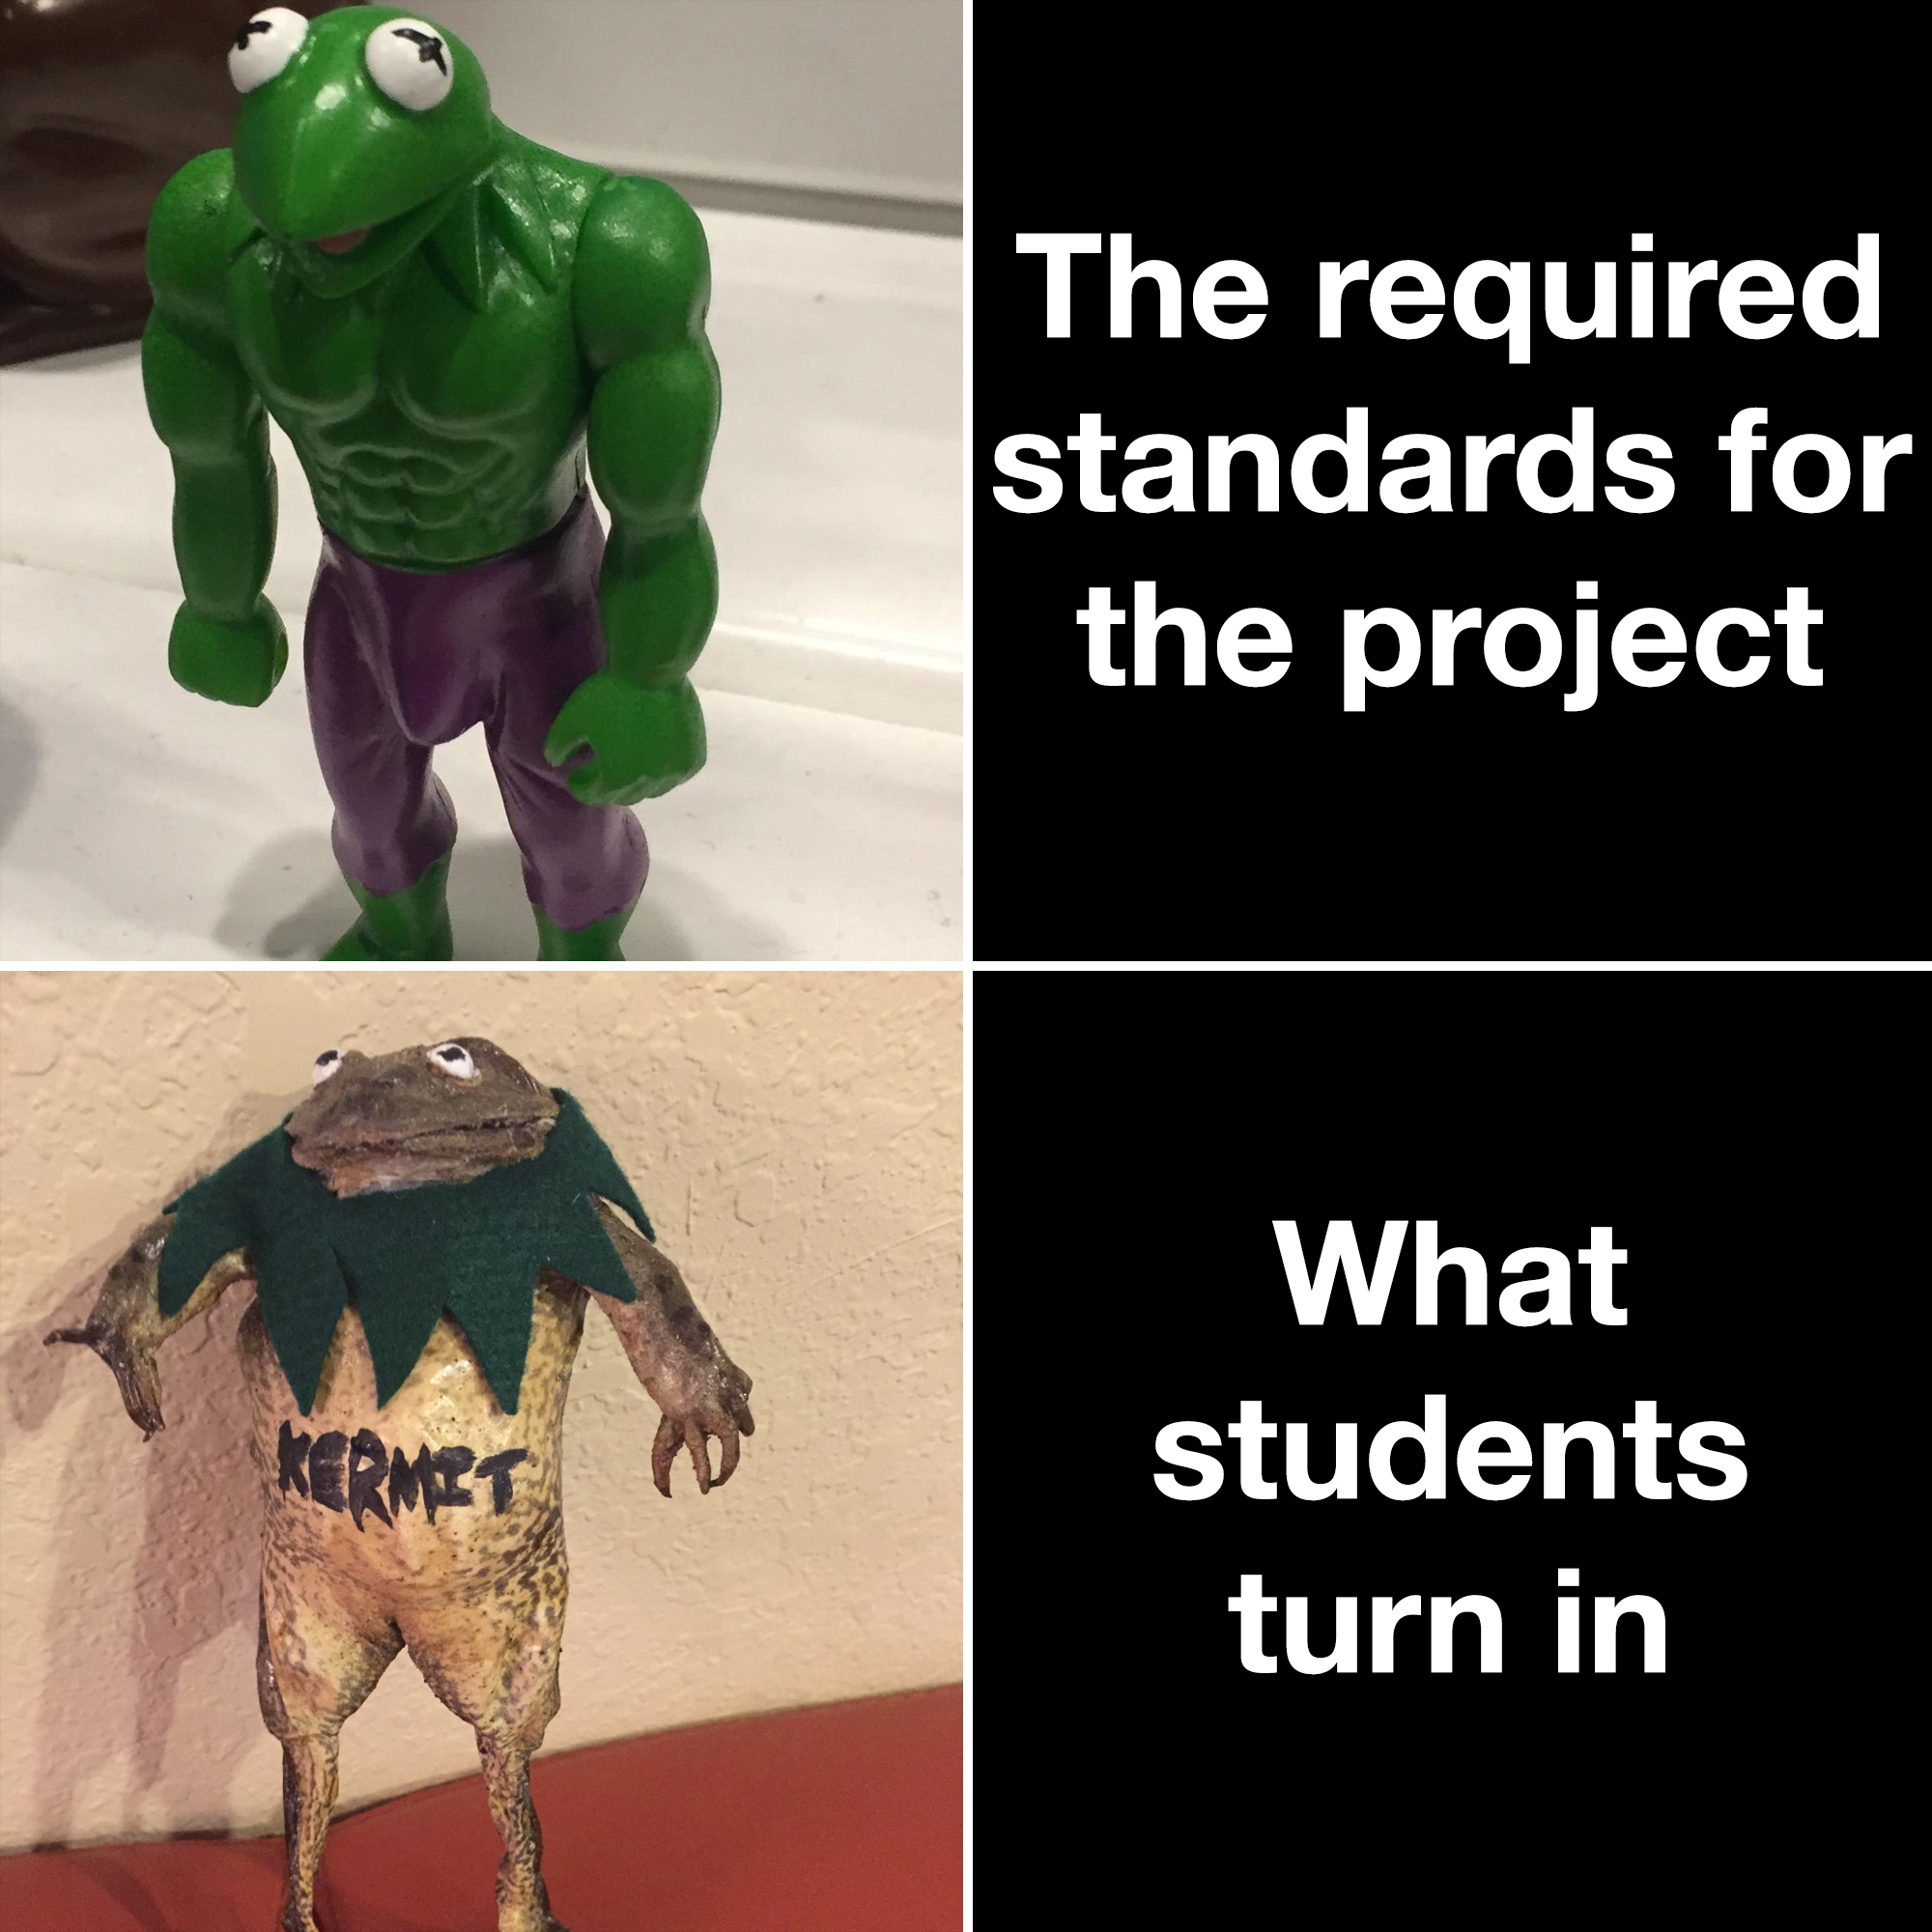 cursed images kermit - The required standards for the project Kermet What students turn in